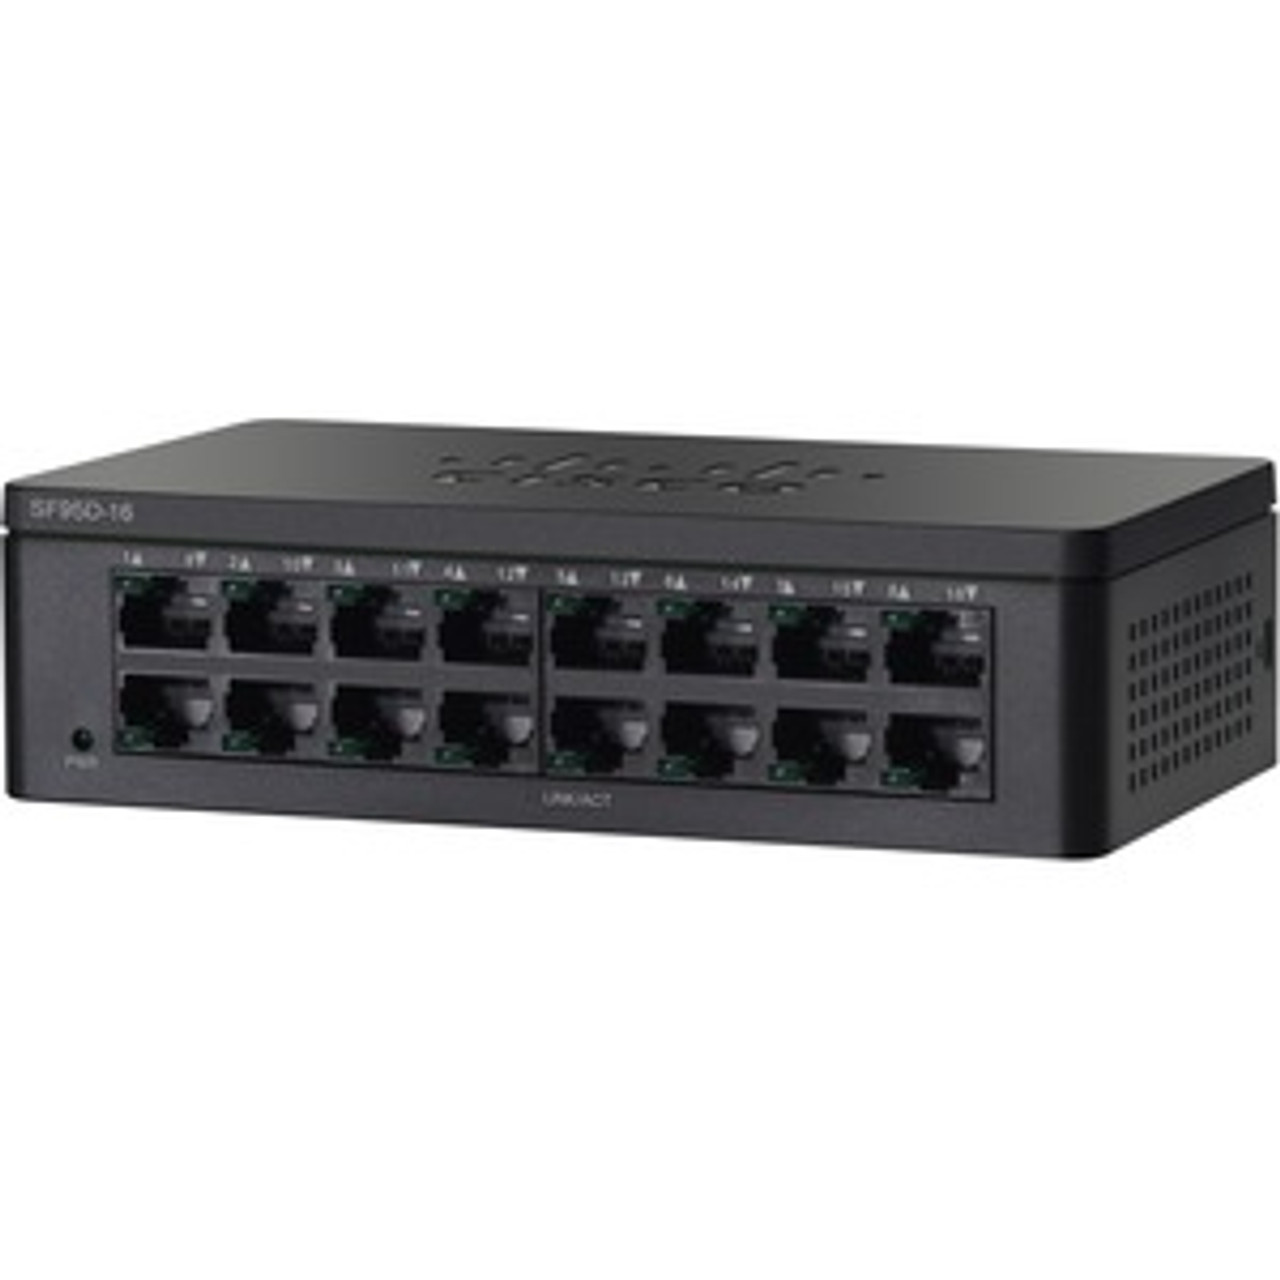 SF95D-16-SG Cisco SF95D-16 16-Port 10/100 Desktop Switch - 16 Ports - Fast Ethernet - 10/100Base-TX - 2 Layer Supported - AC Adapter - Twisted Pair - 